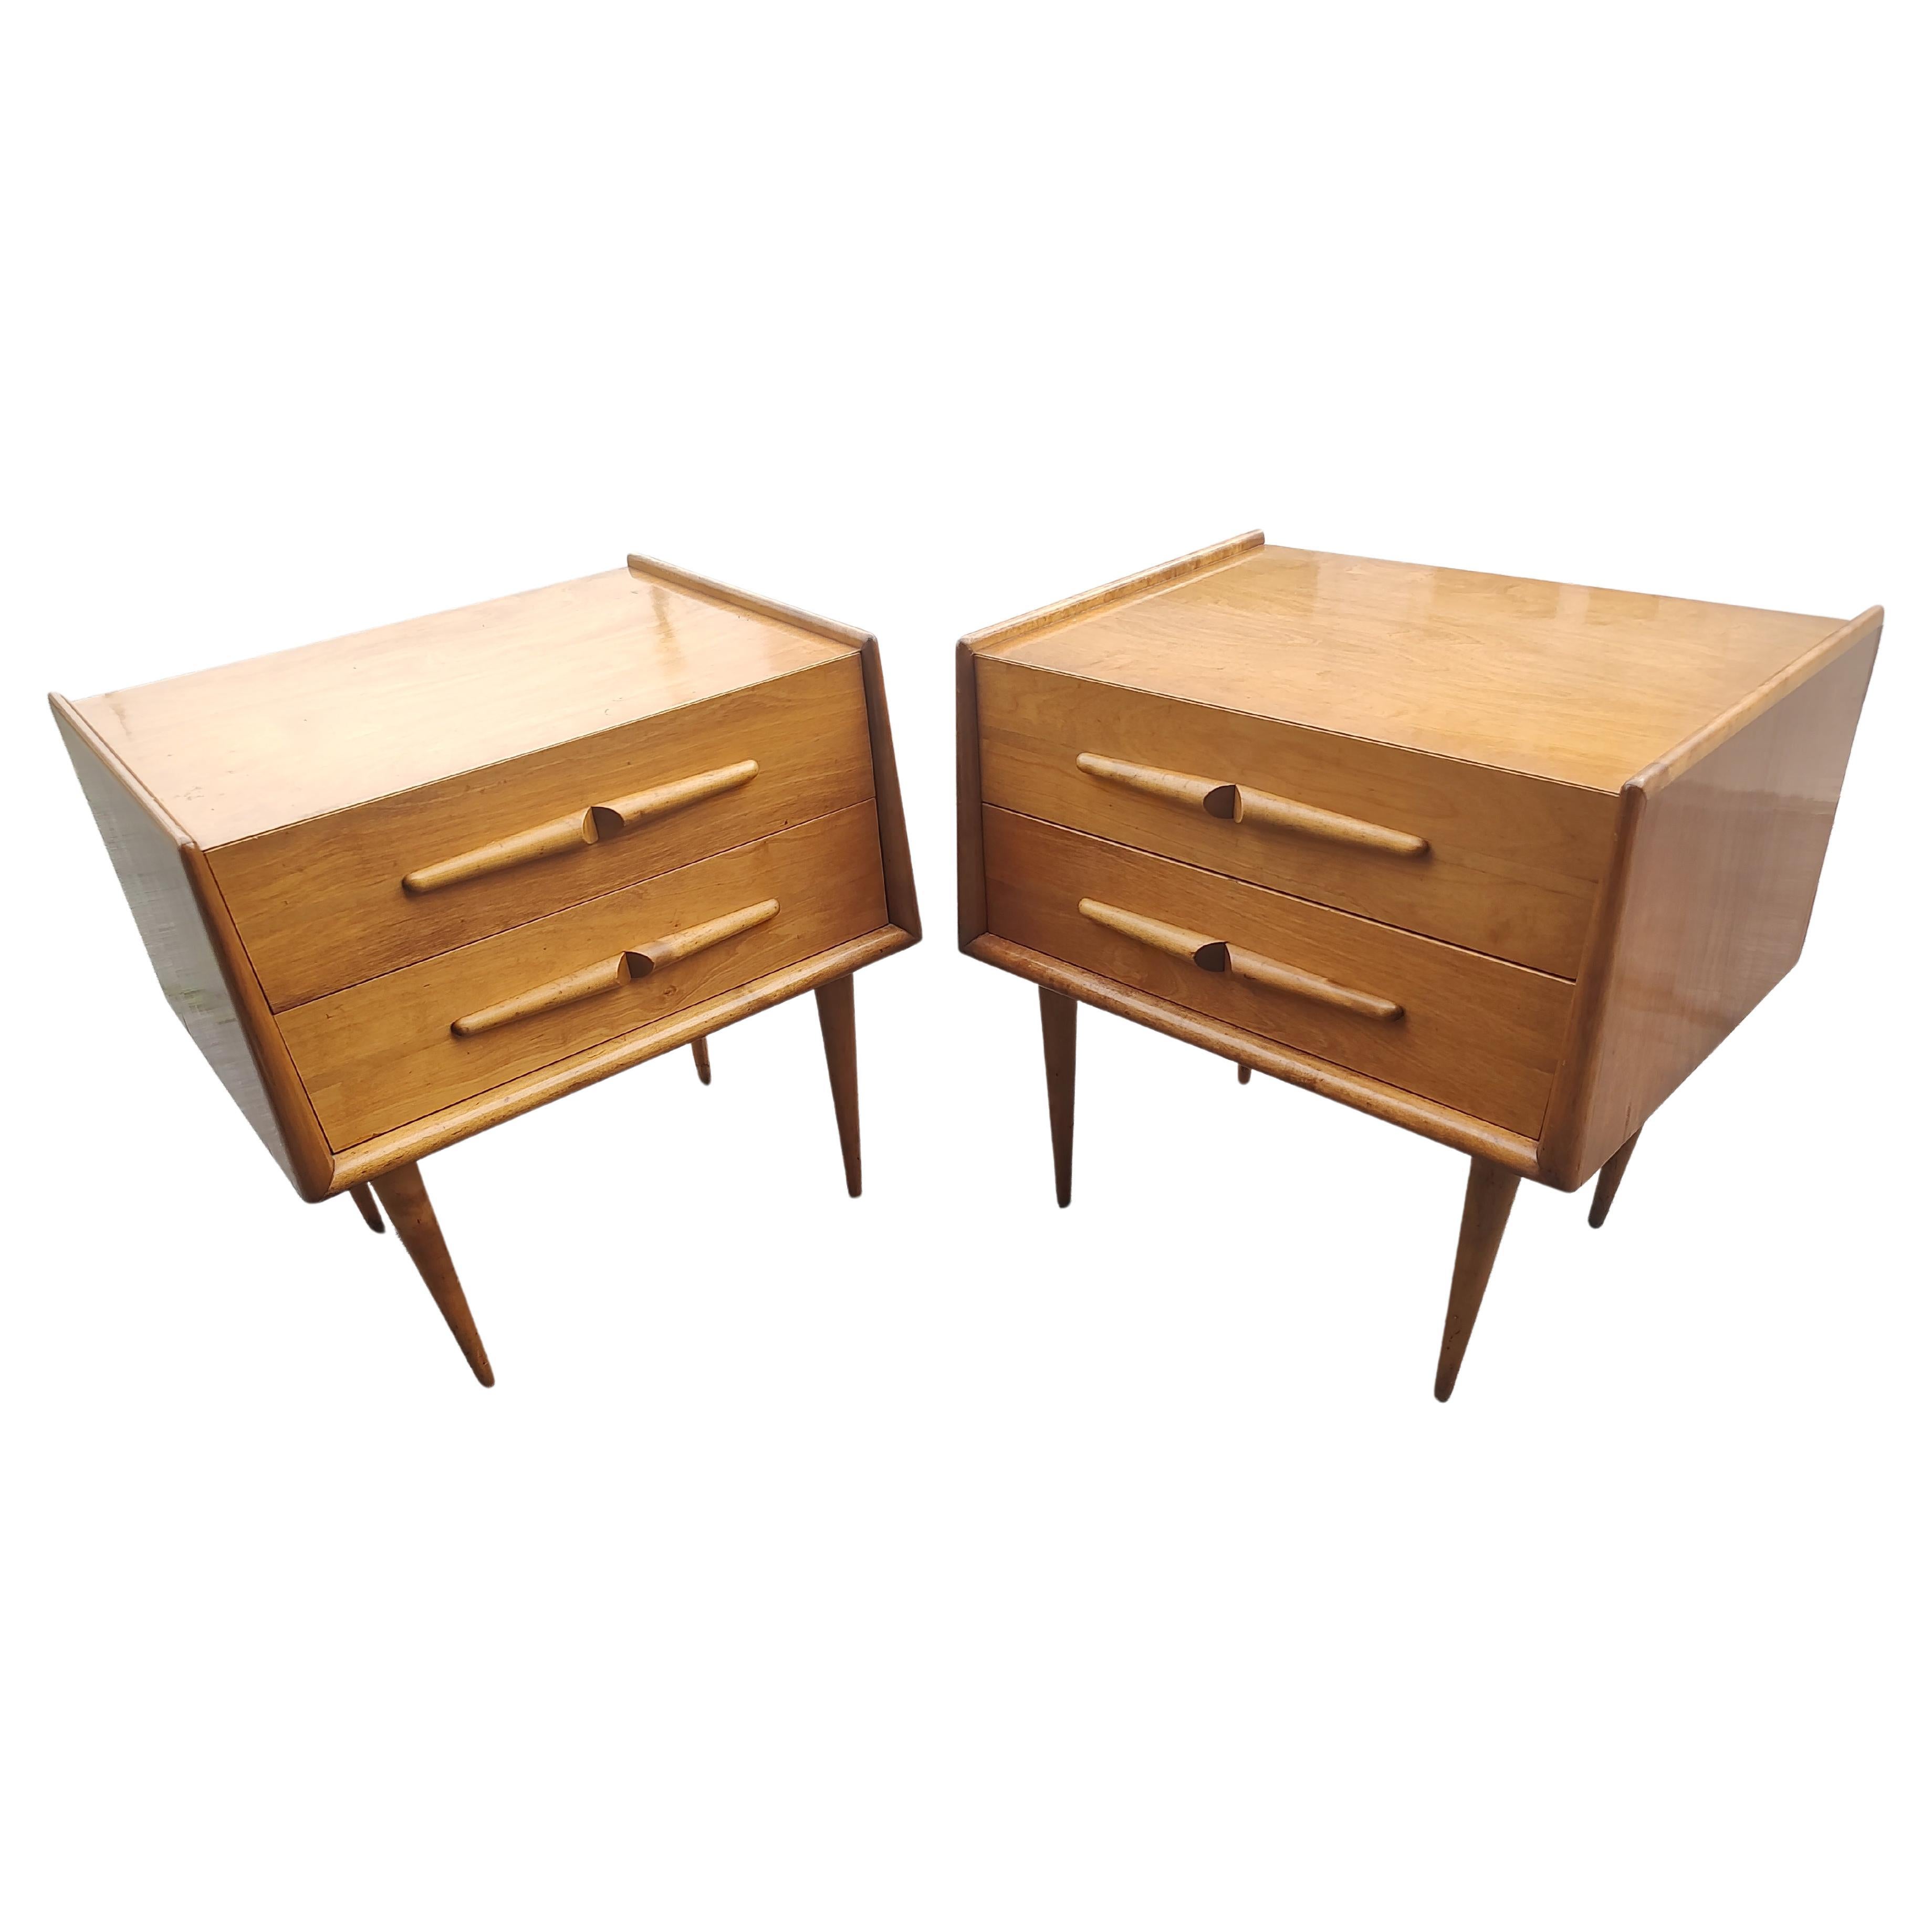 Pair of Mid Century Modern Night Stands in Birch by Edmond Spence Sweden C1953 For Sale